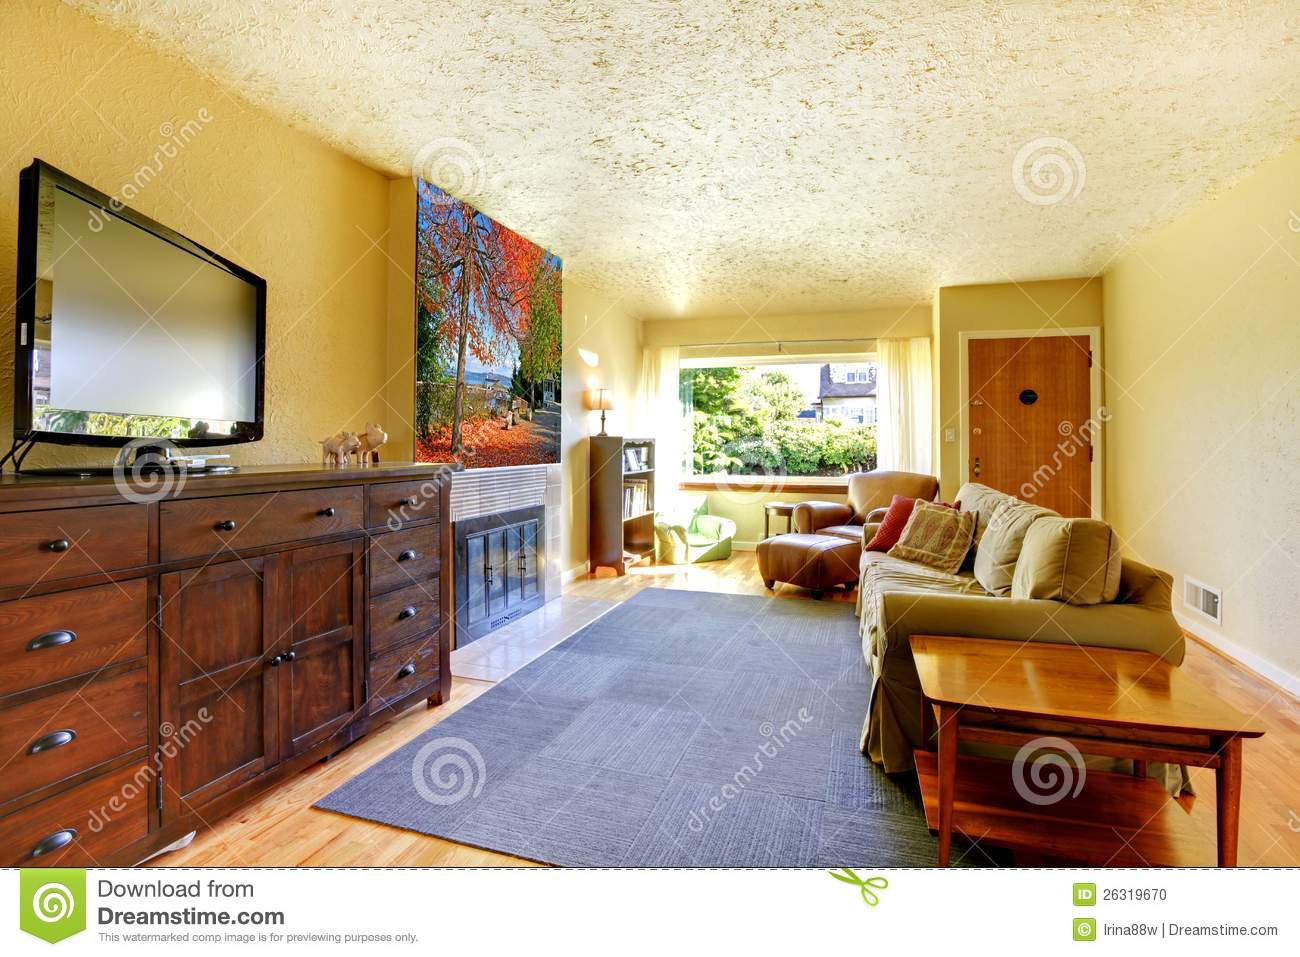 Living Room With Yellow Walls
 Living Room With Grey Rug Yellow Walls And TV